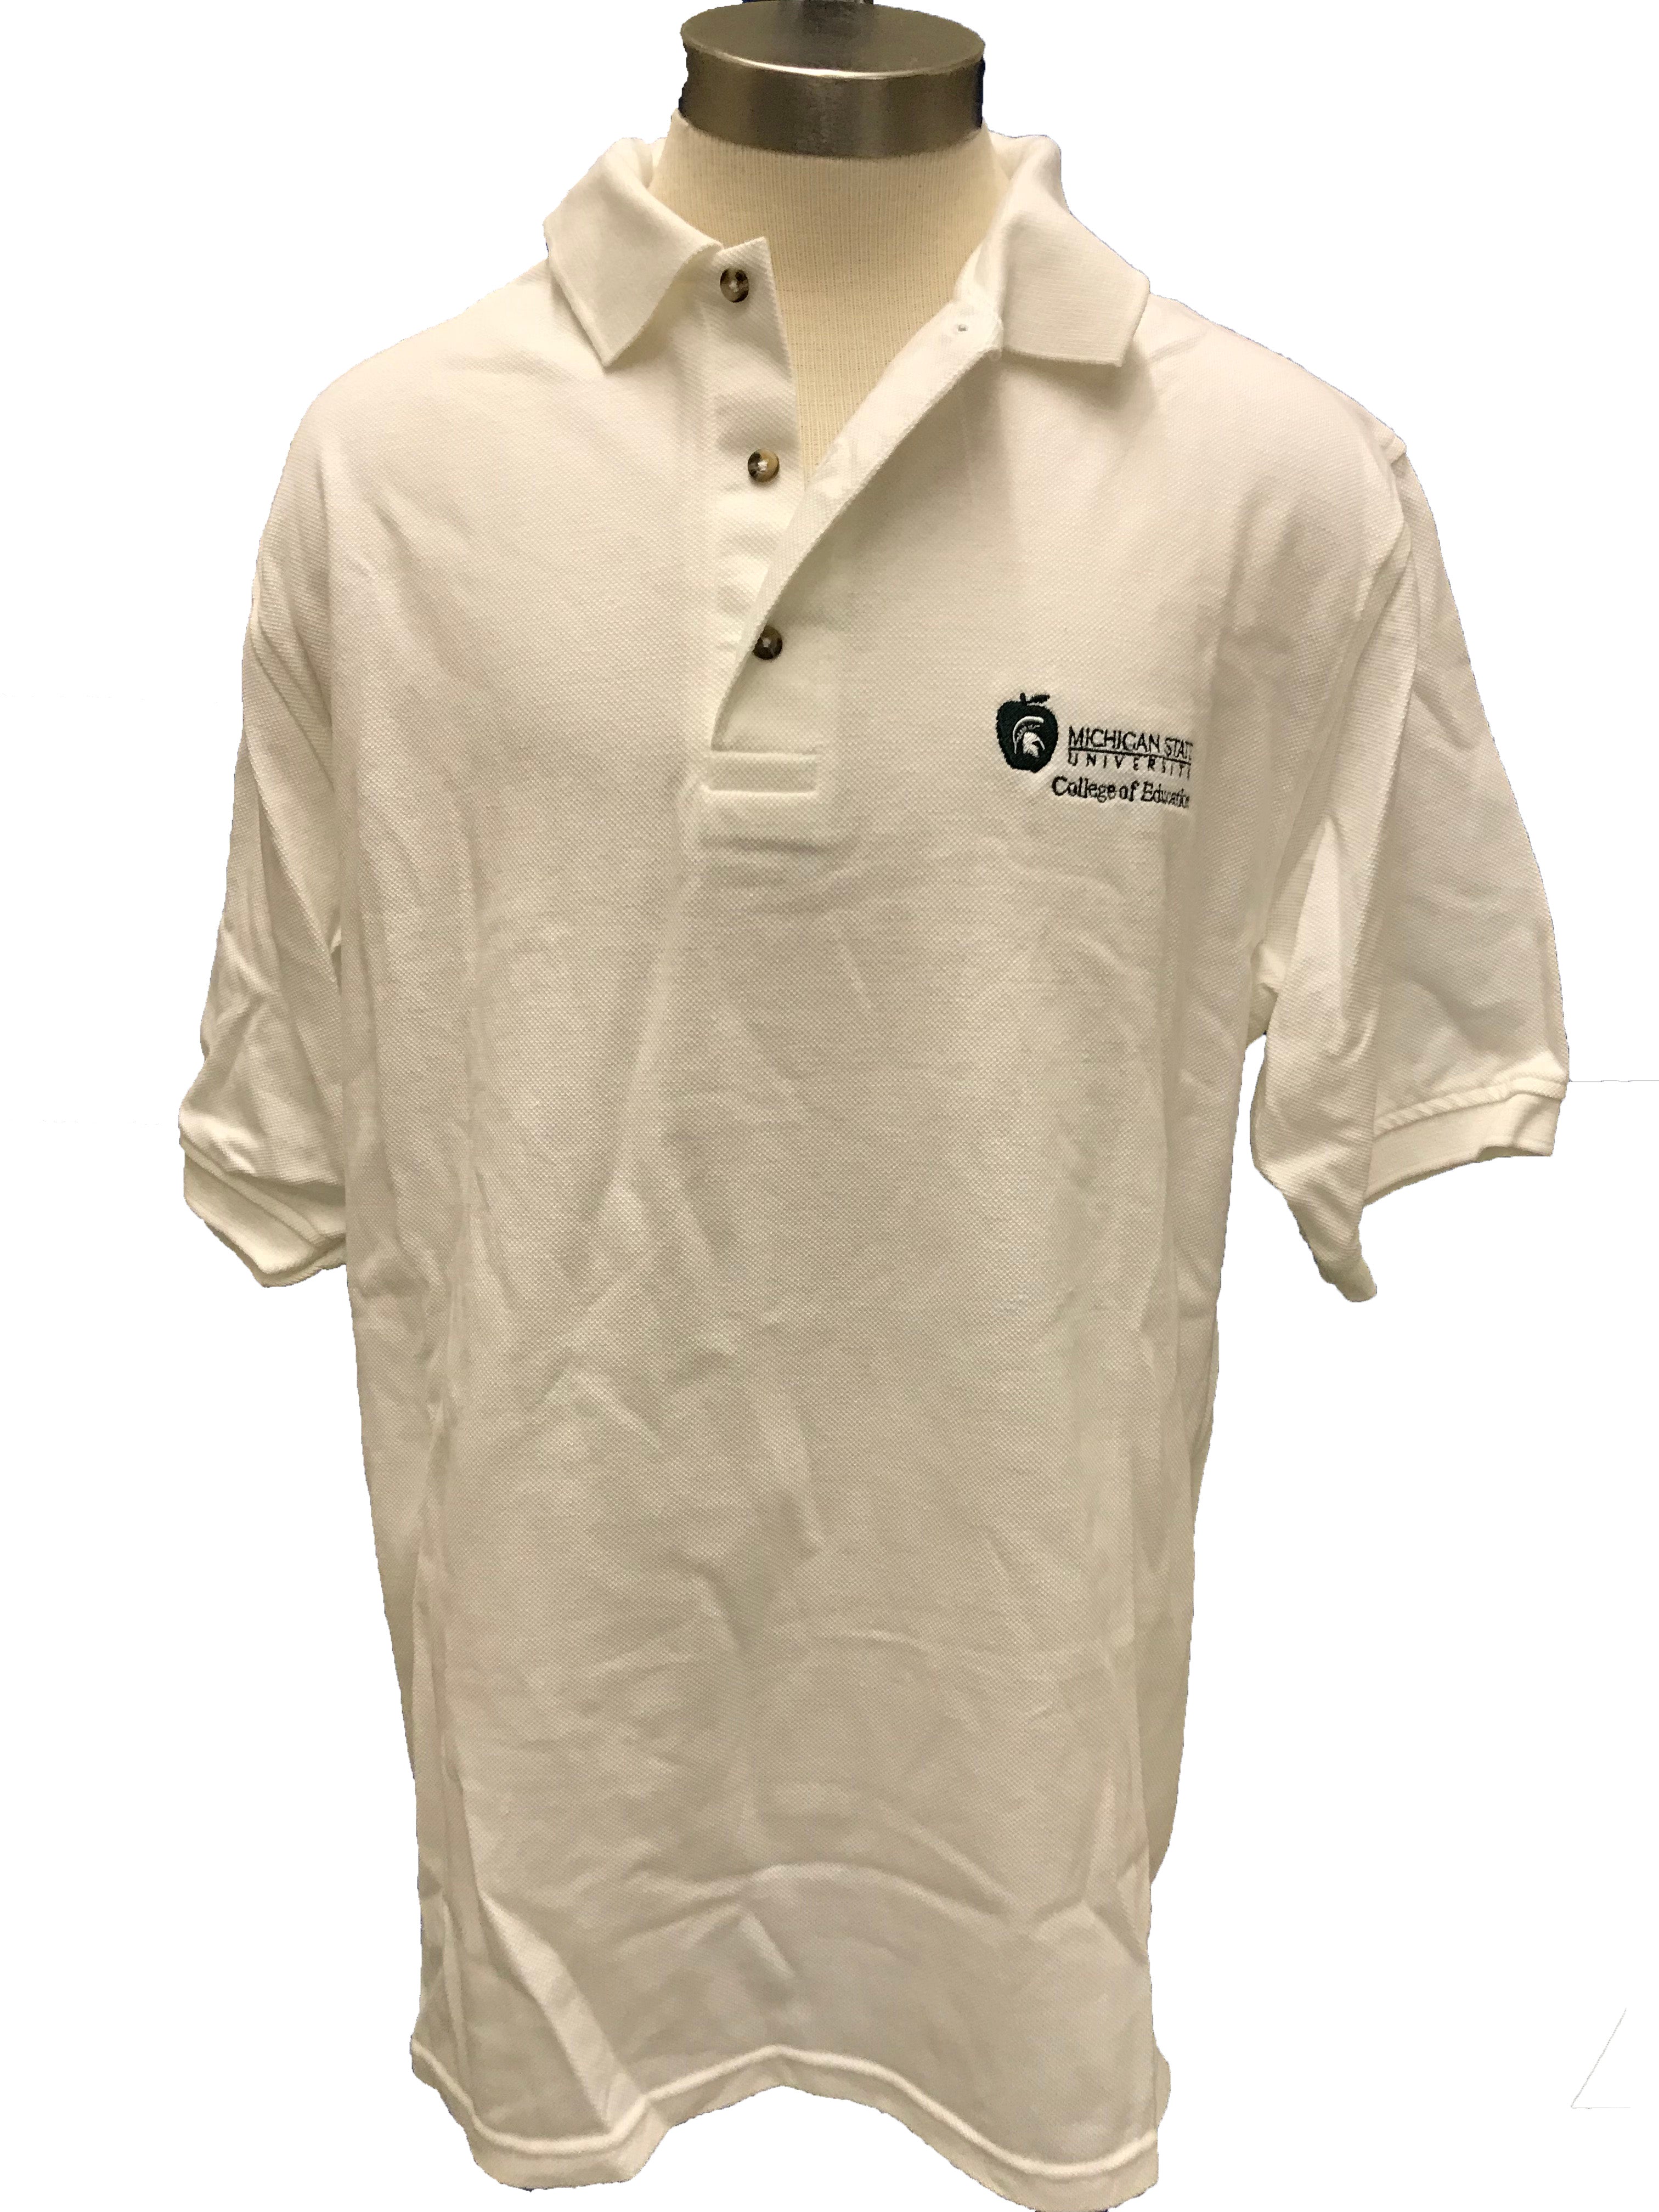 Country Cottons MSU College of Education White Polo Unisex Size M